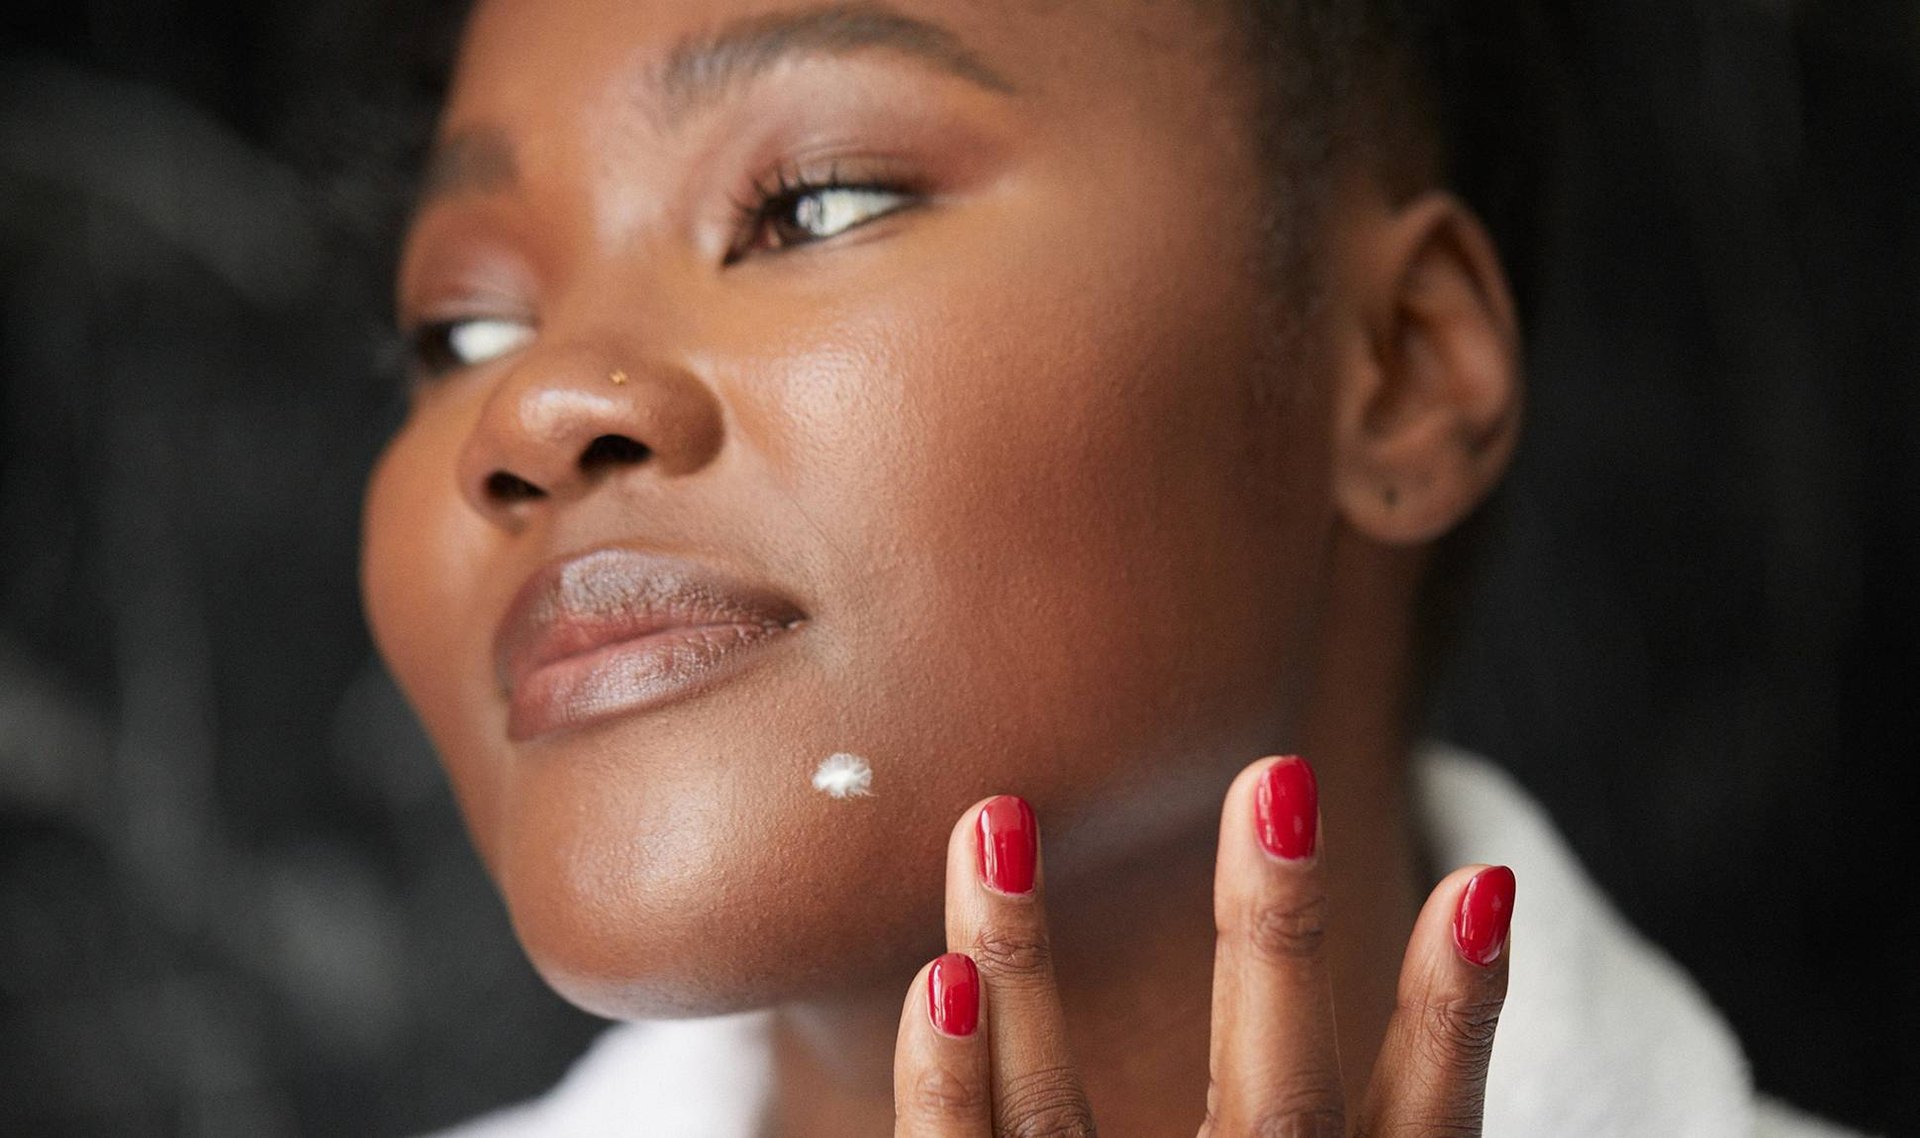 How to Address Acne on Dark Skin Tones, According to a Dermatologist